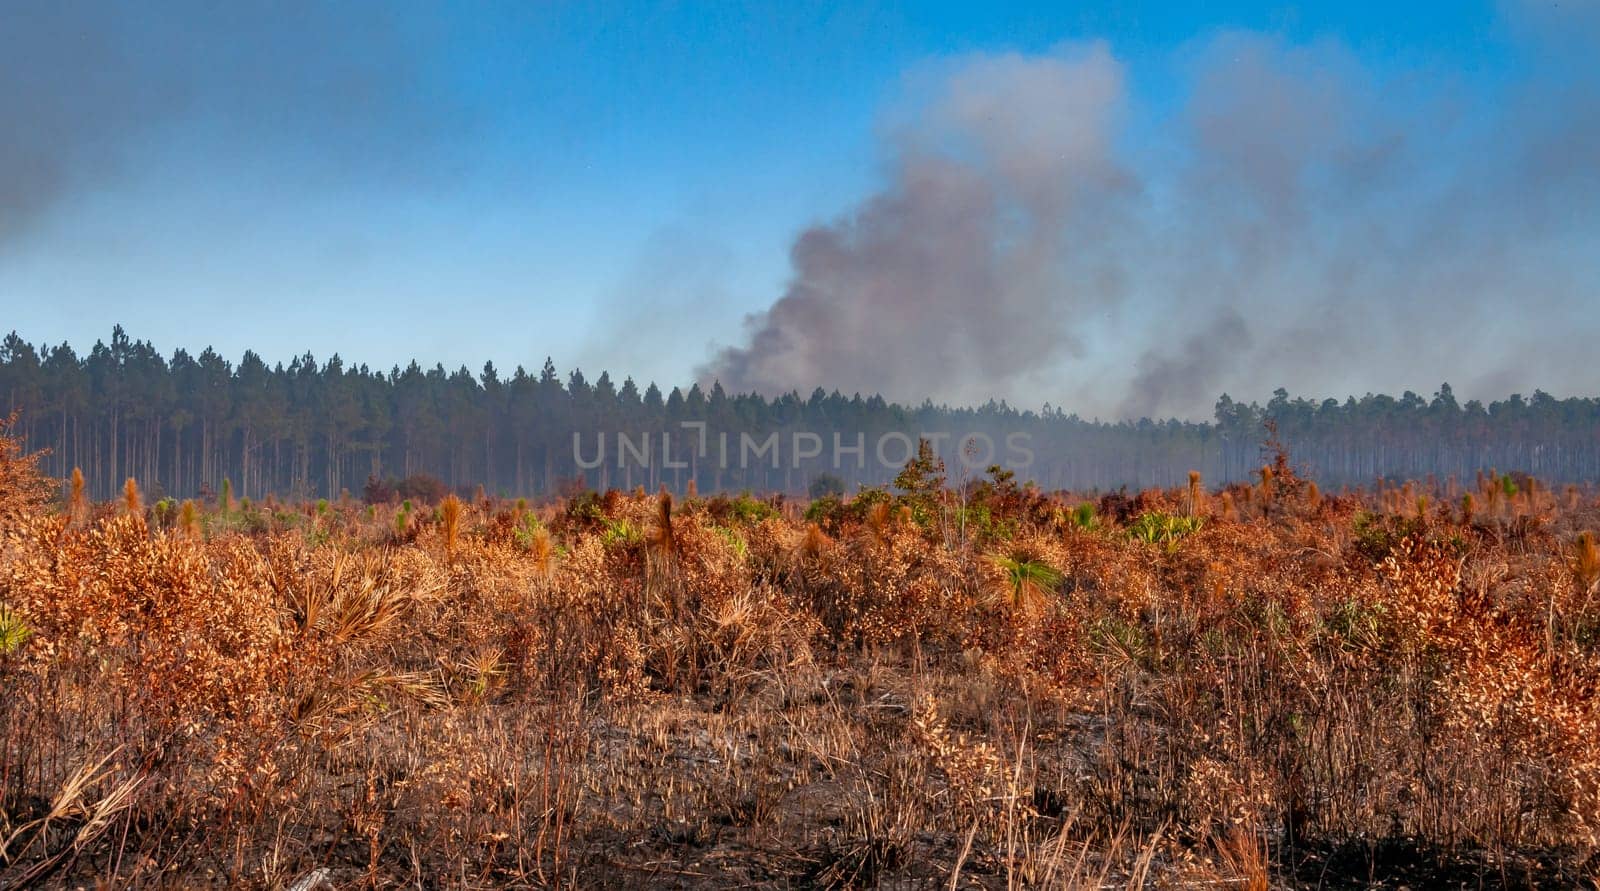 Wildland fires, Burnt field with tree plantings and palm trees, Florida